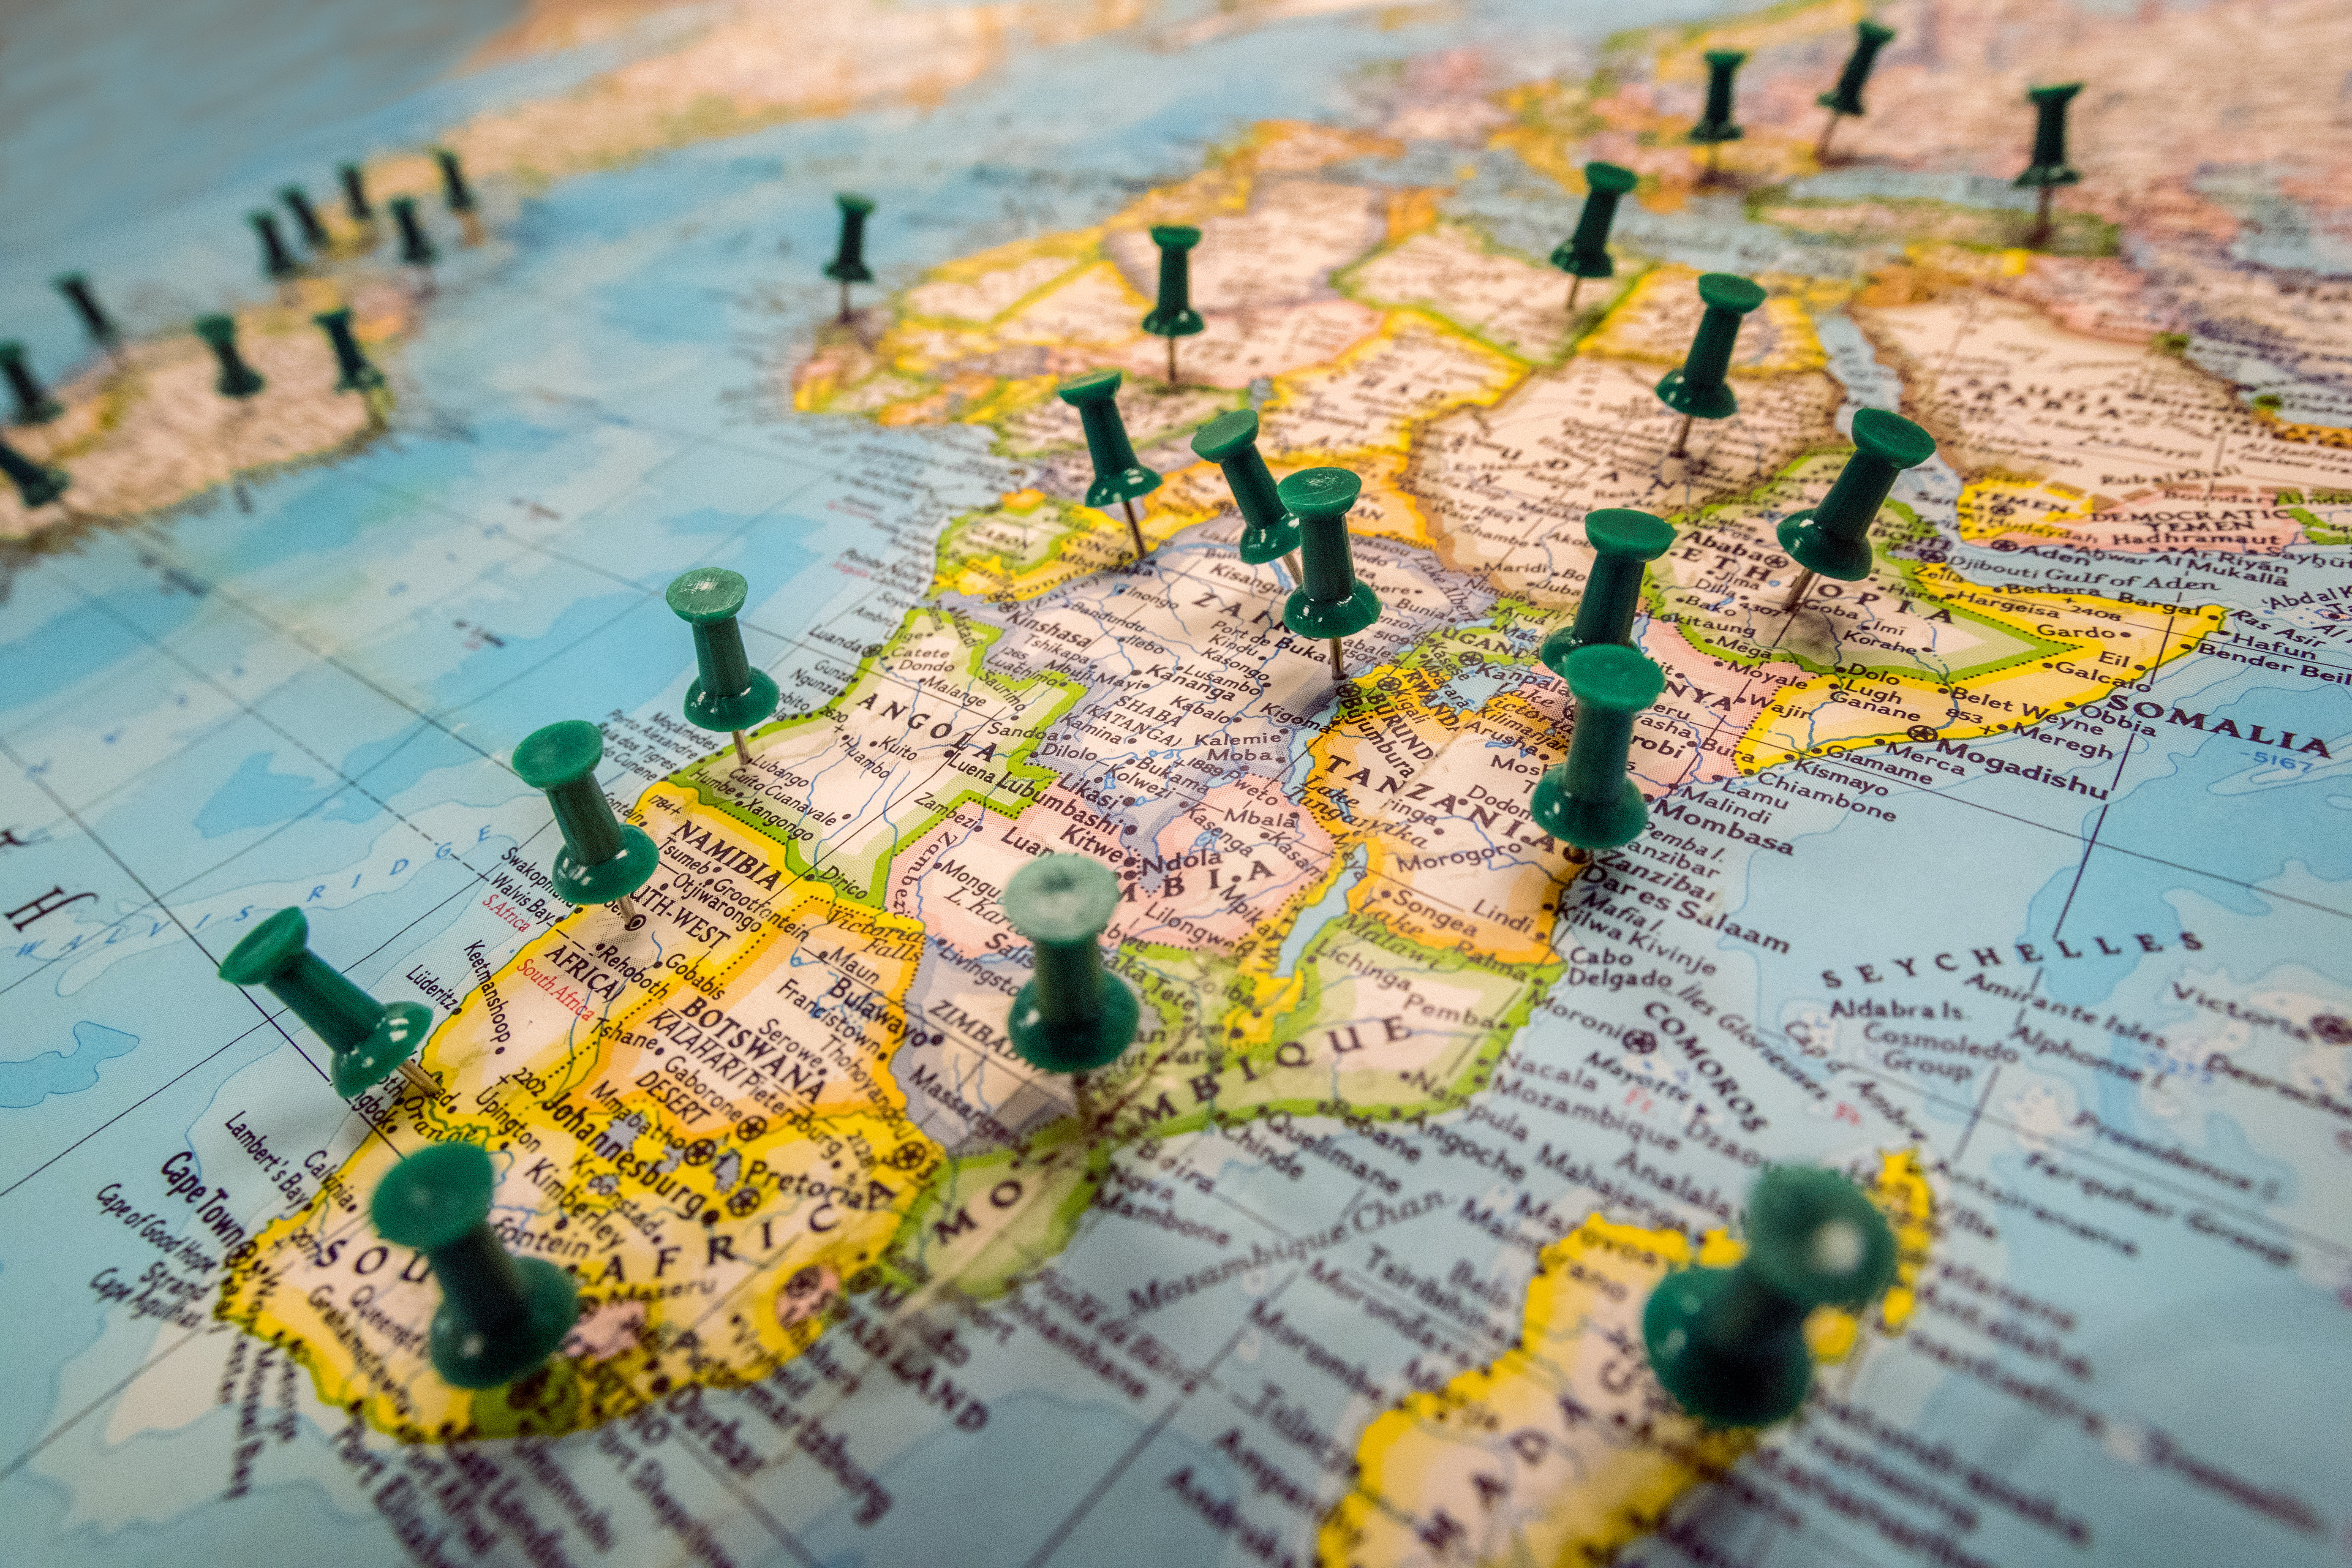 Detail photo of a map focused on the continent of Africa with green push pins marking various cities across the globe